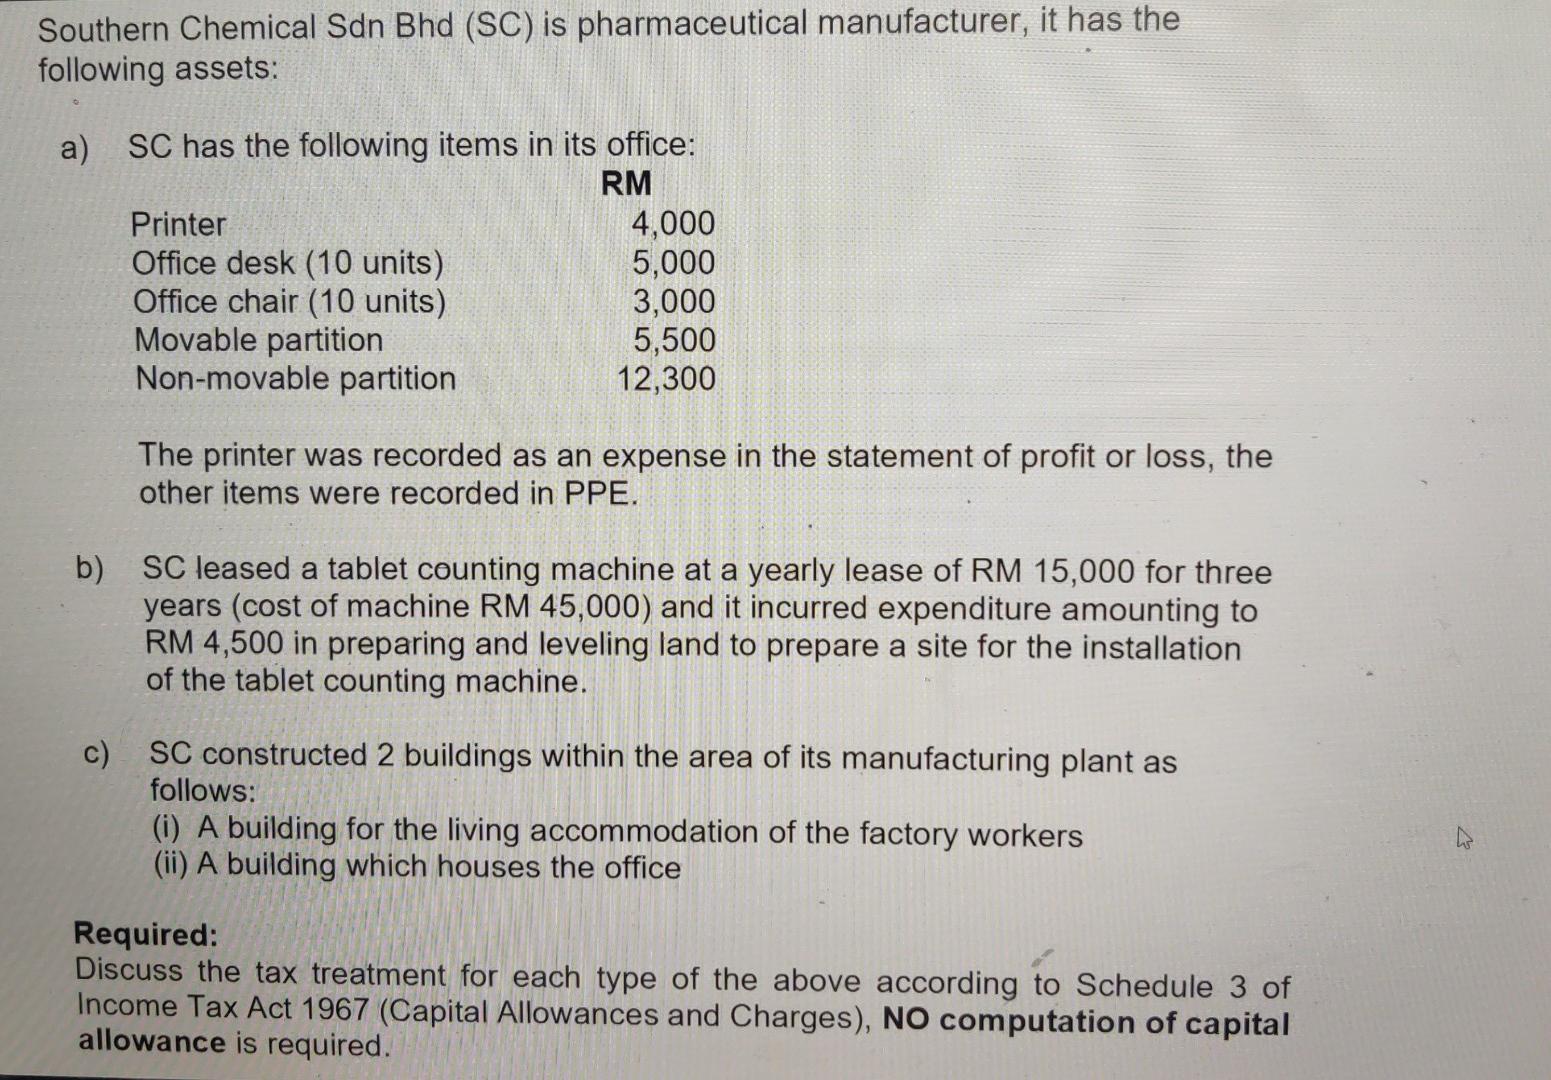 Southern Chemical Sdn Bhd (SC) is pharmaceutical manufacturer, it has the following assets: a) SC has the following items in